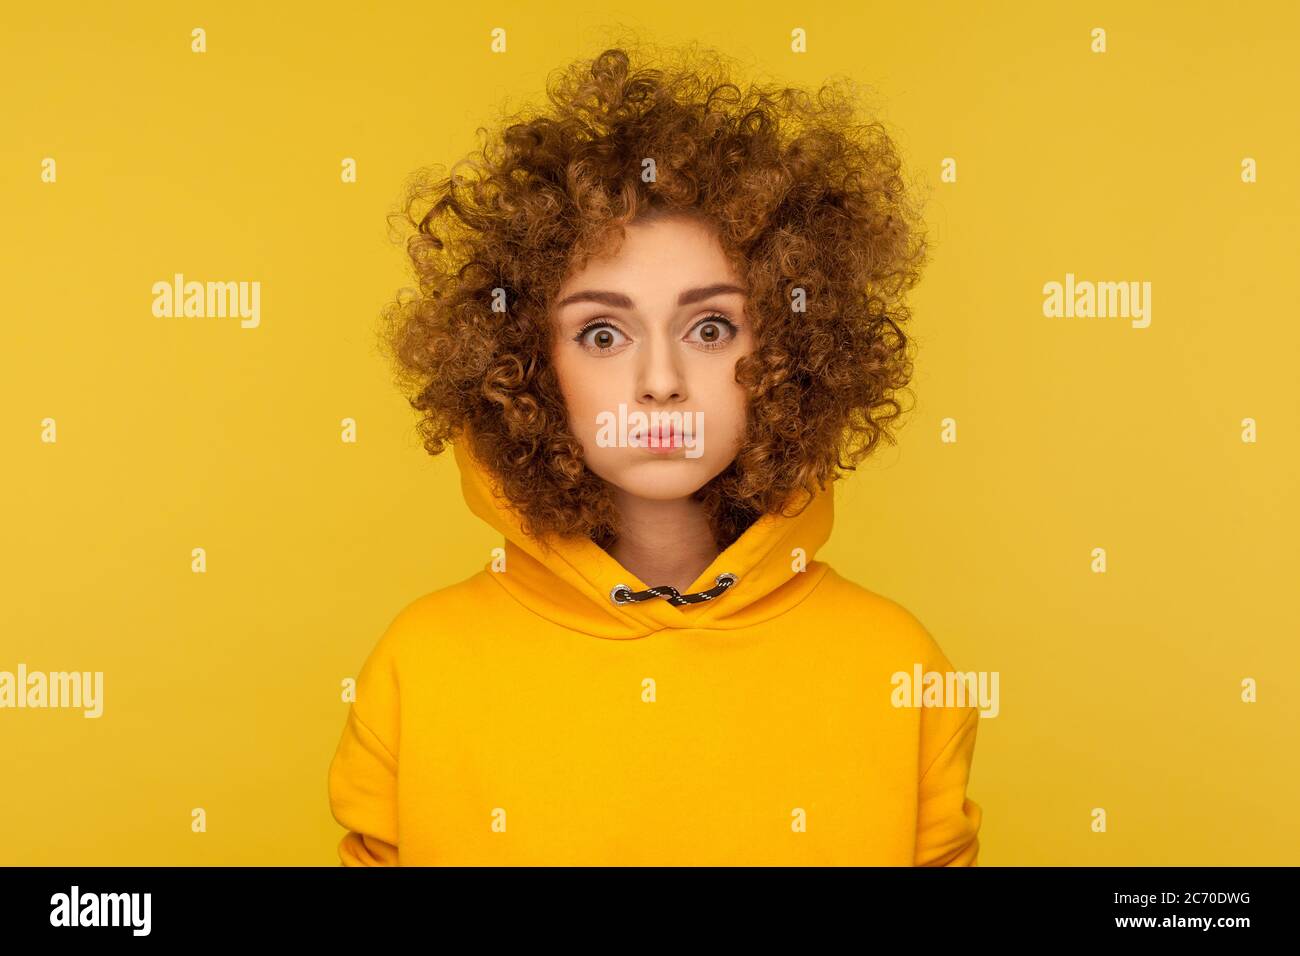 Portrait of cute curly-haired woman in urban style hoodie standing with puffed cheeks, holding breath and looking at camera with big eyes, amazed expr Stock Photo